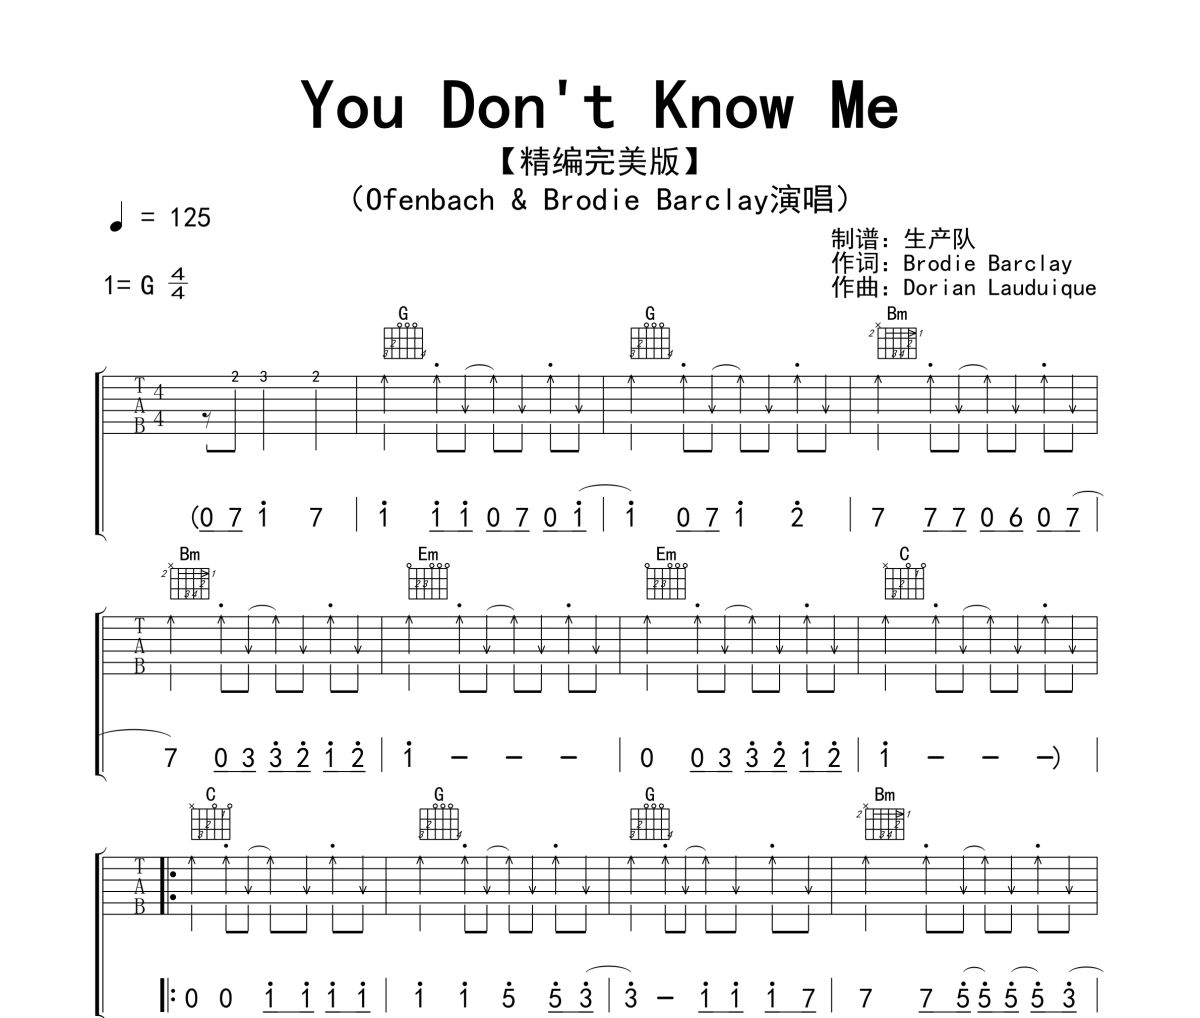 You Don't Know Me吉他谱 Ofenbach &Brodie Barclay《You Don't Know